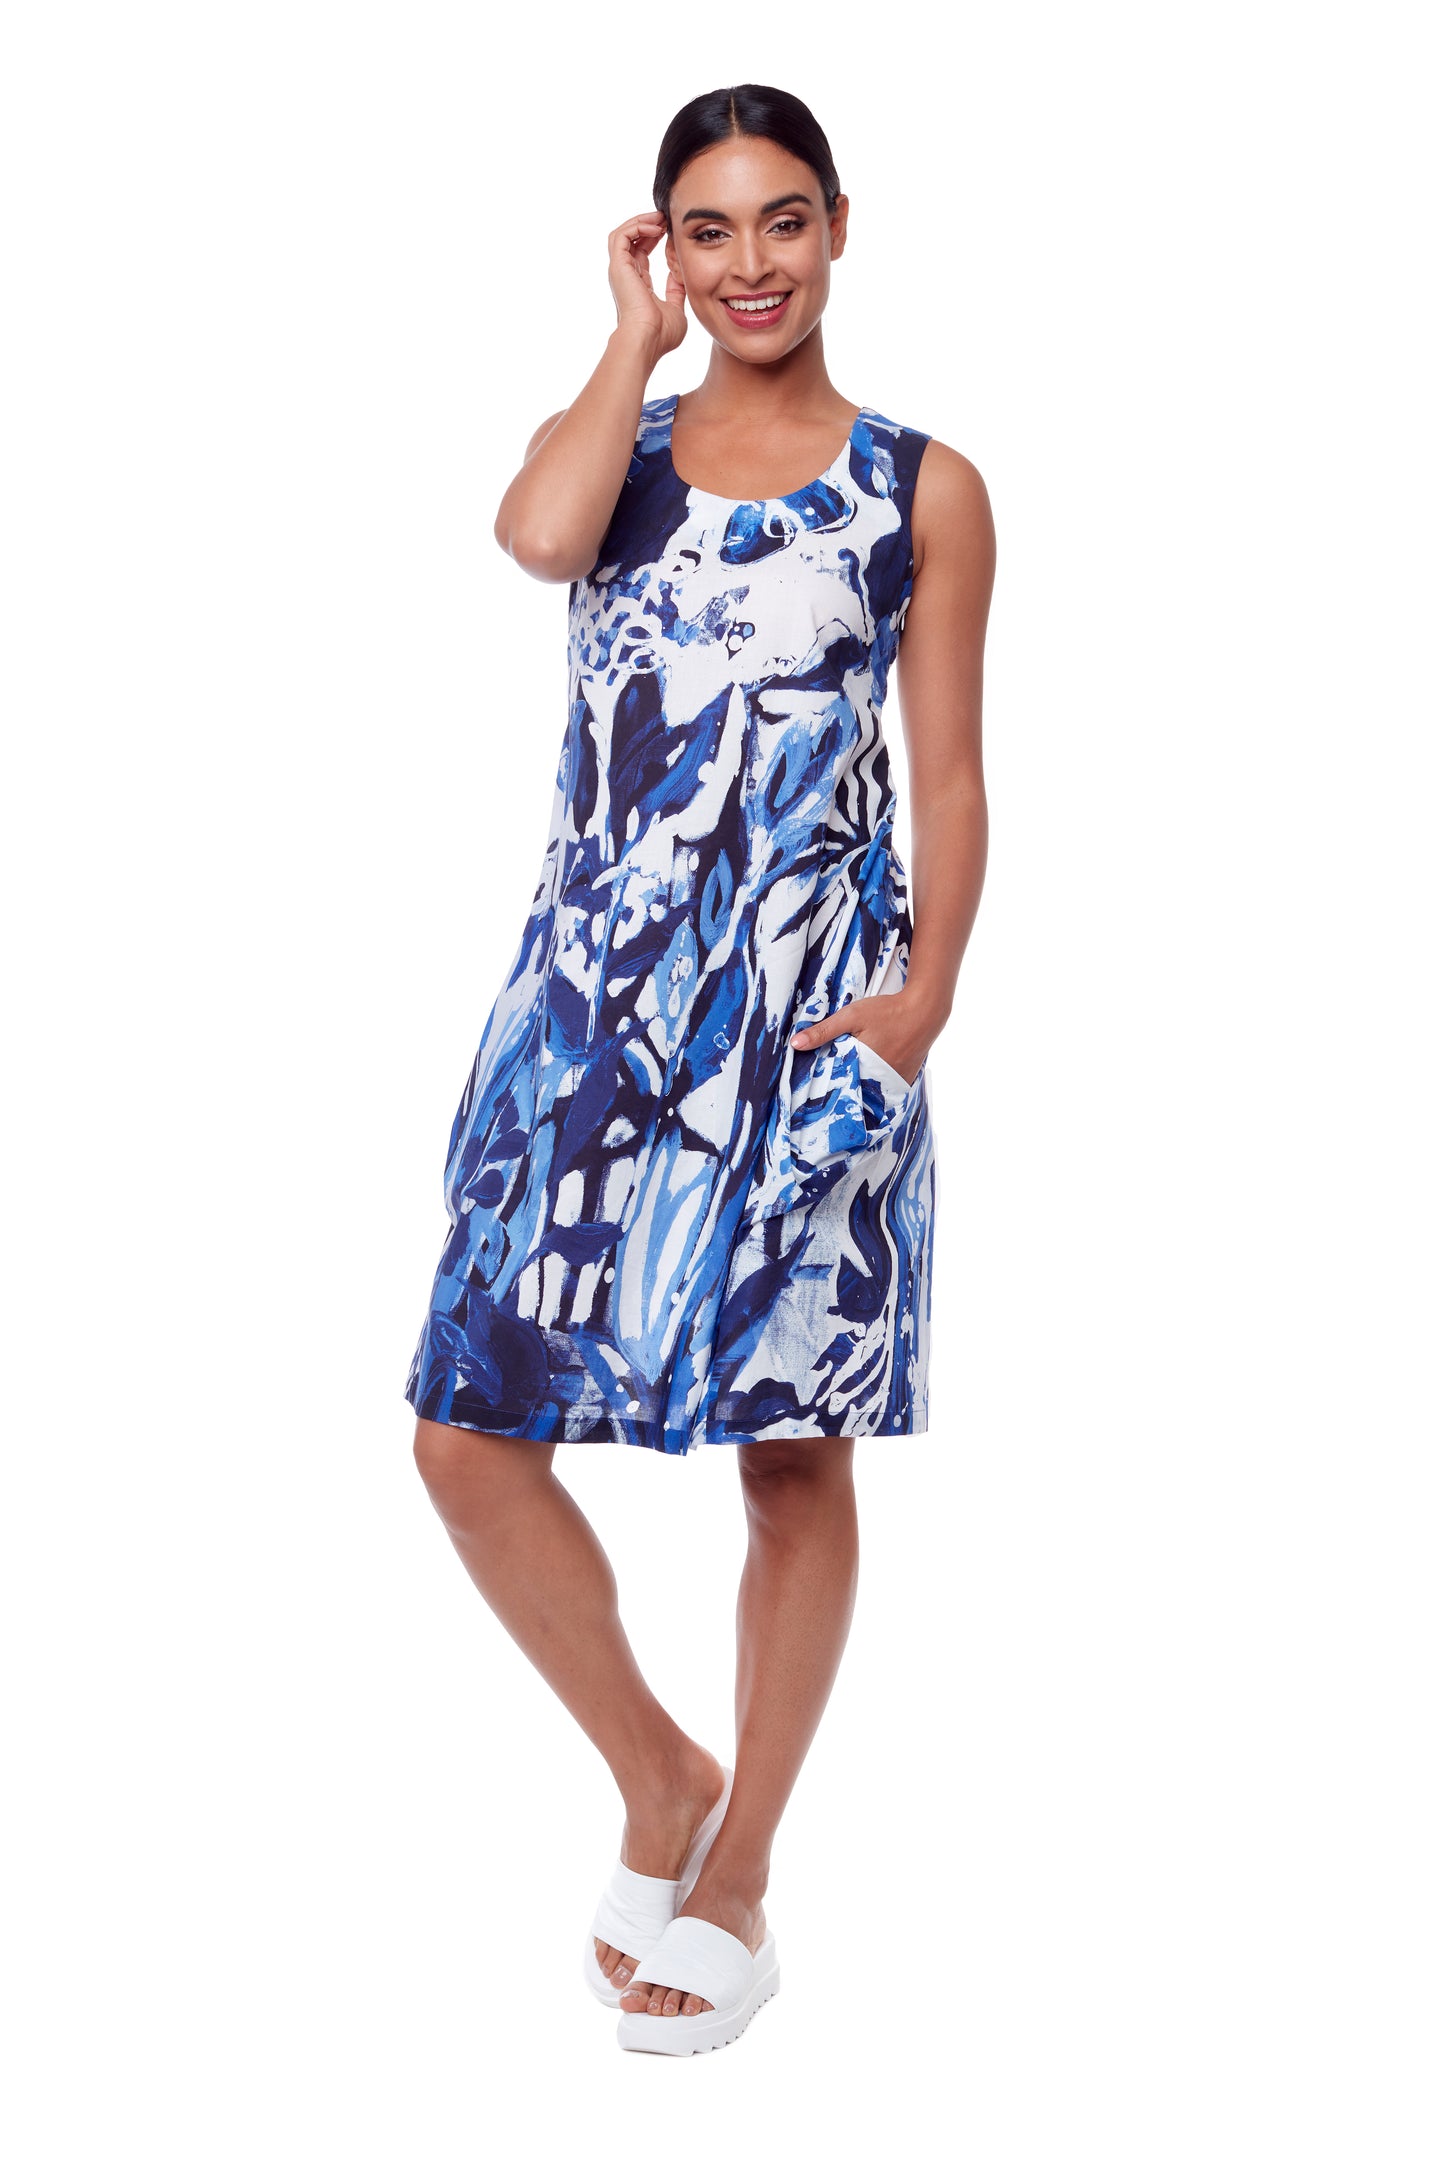 Blue & White: At Liberty in the Garden bubble dress